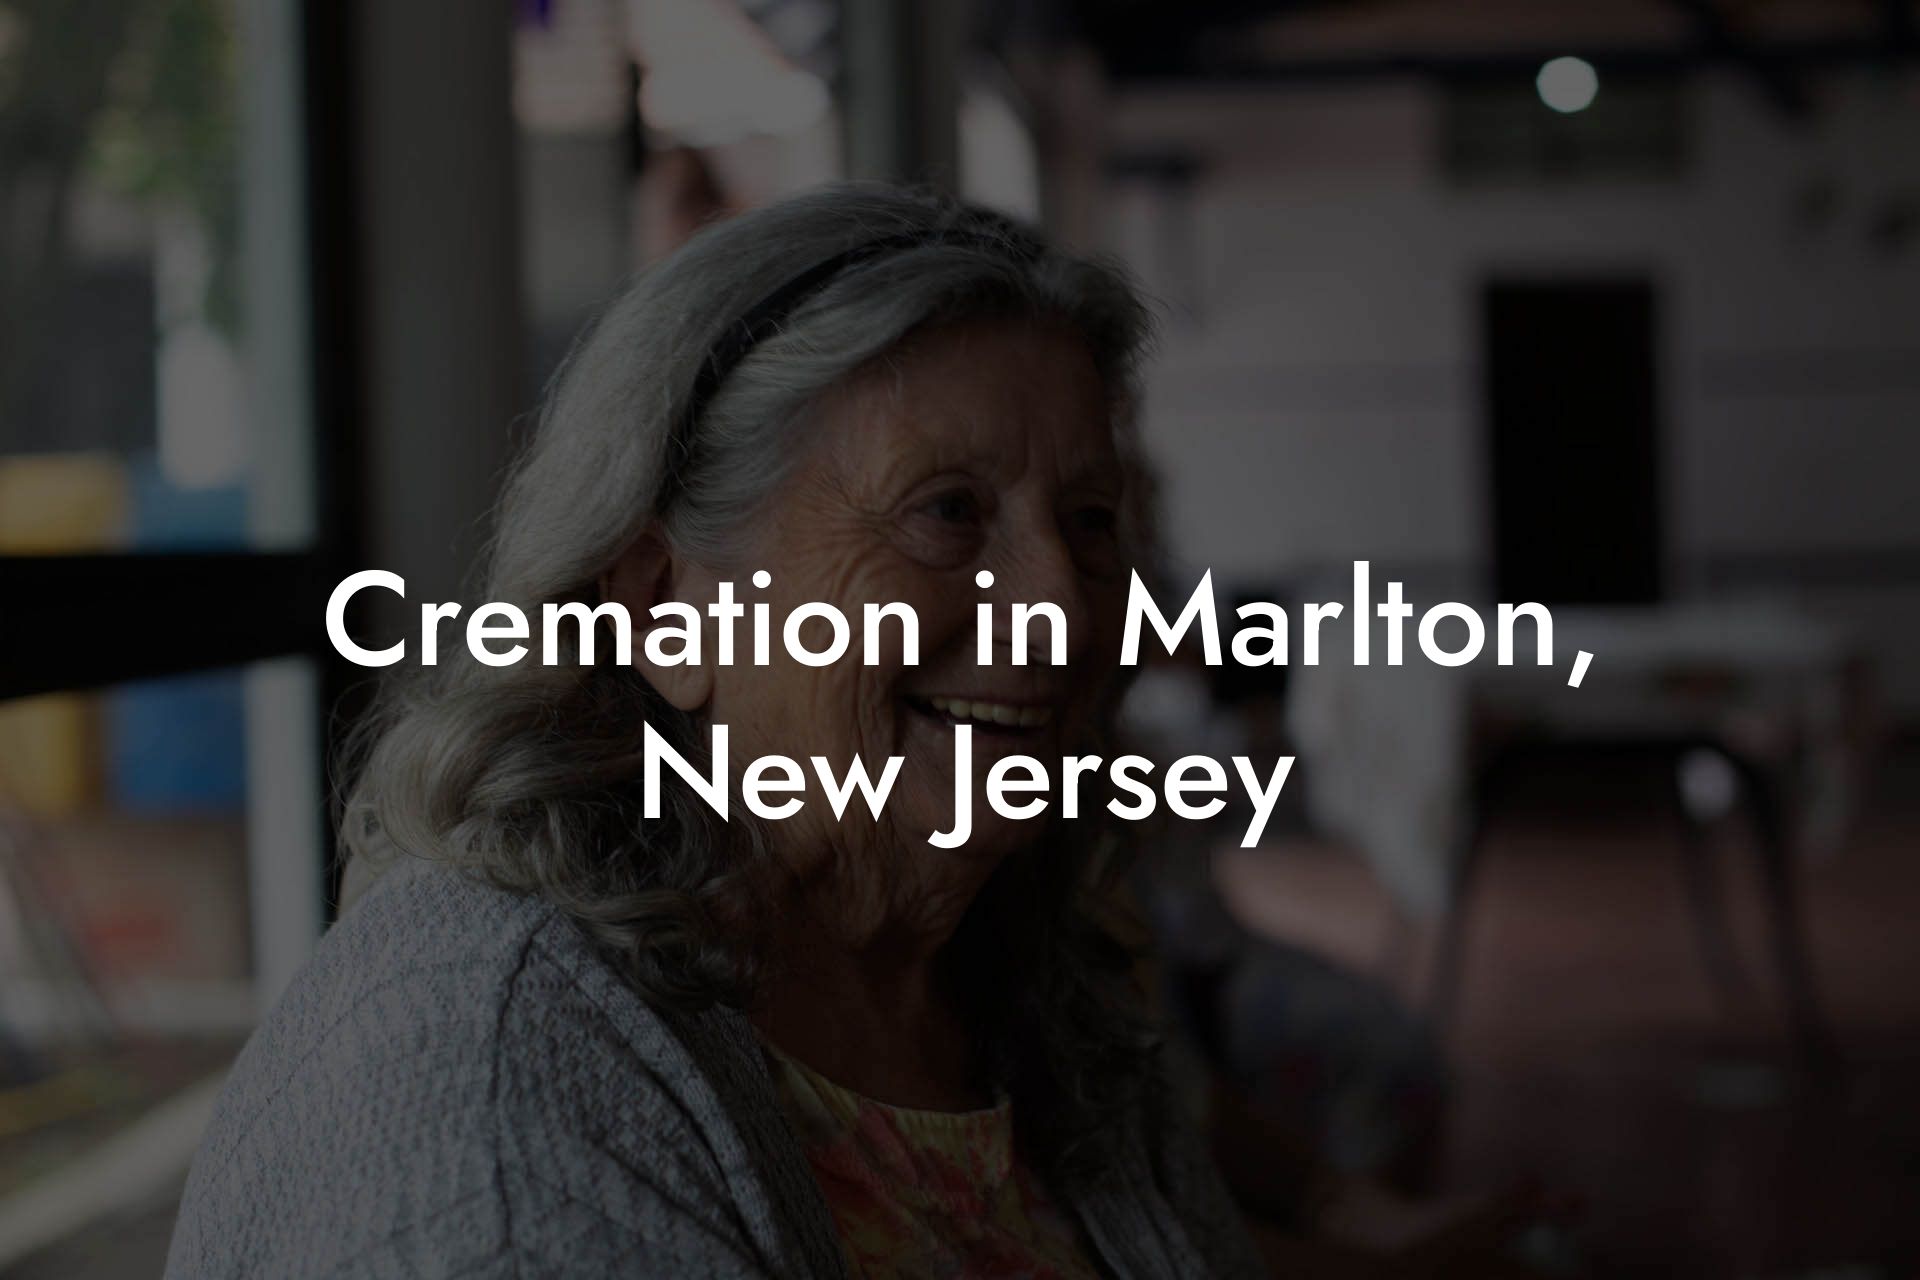 Cremation in Marlton, New Jersey